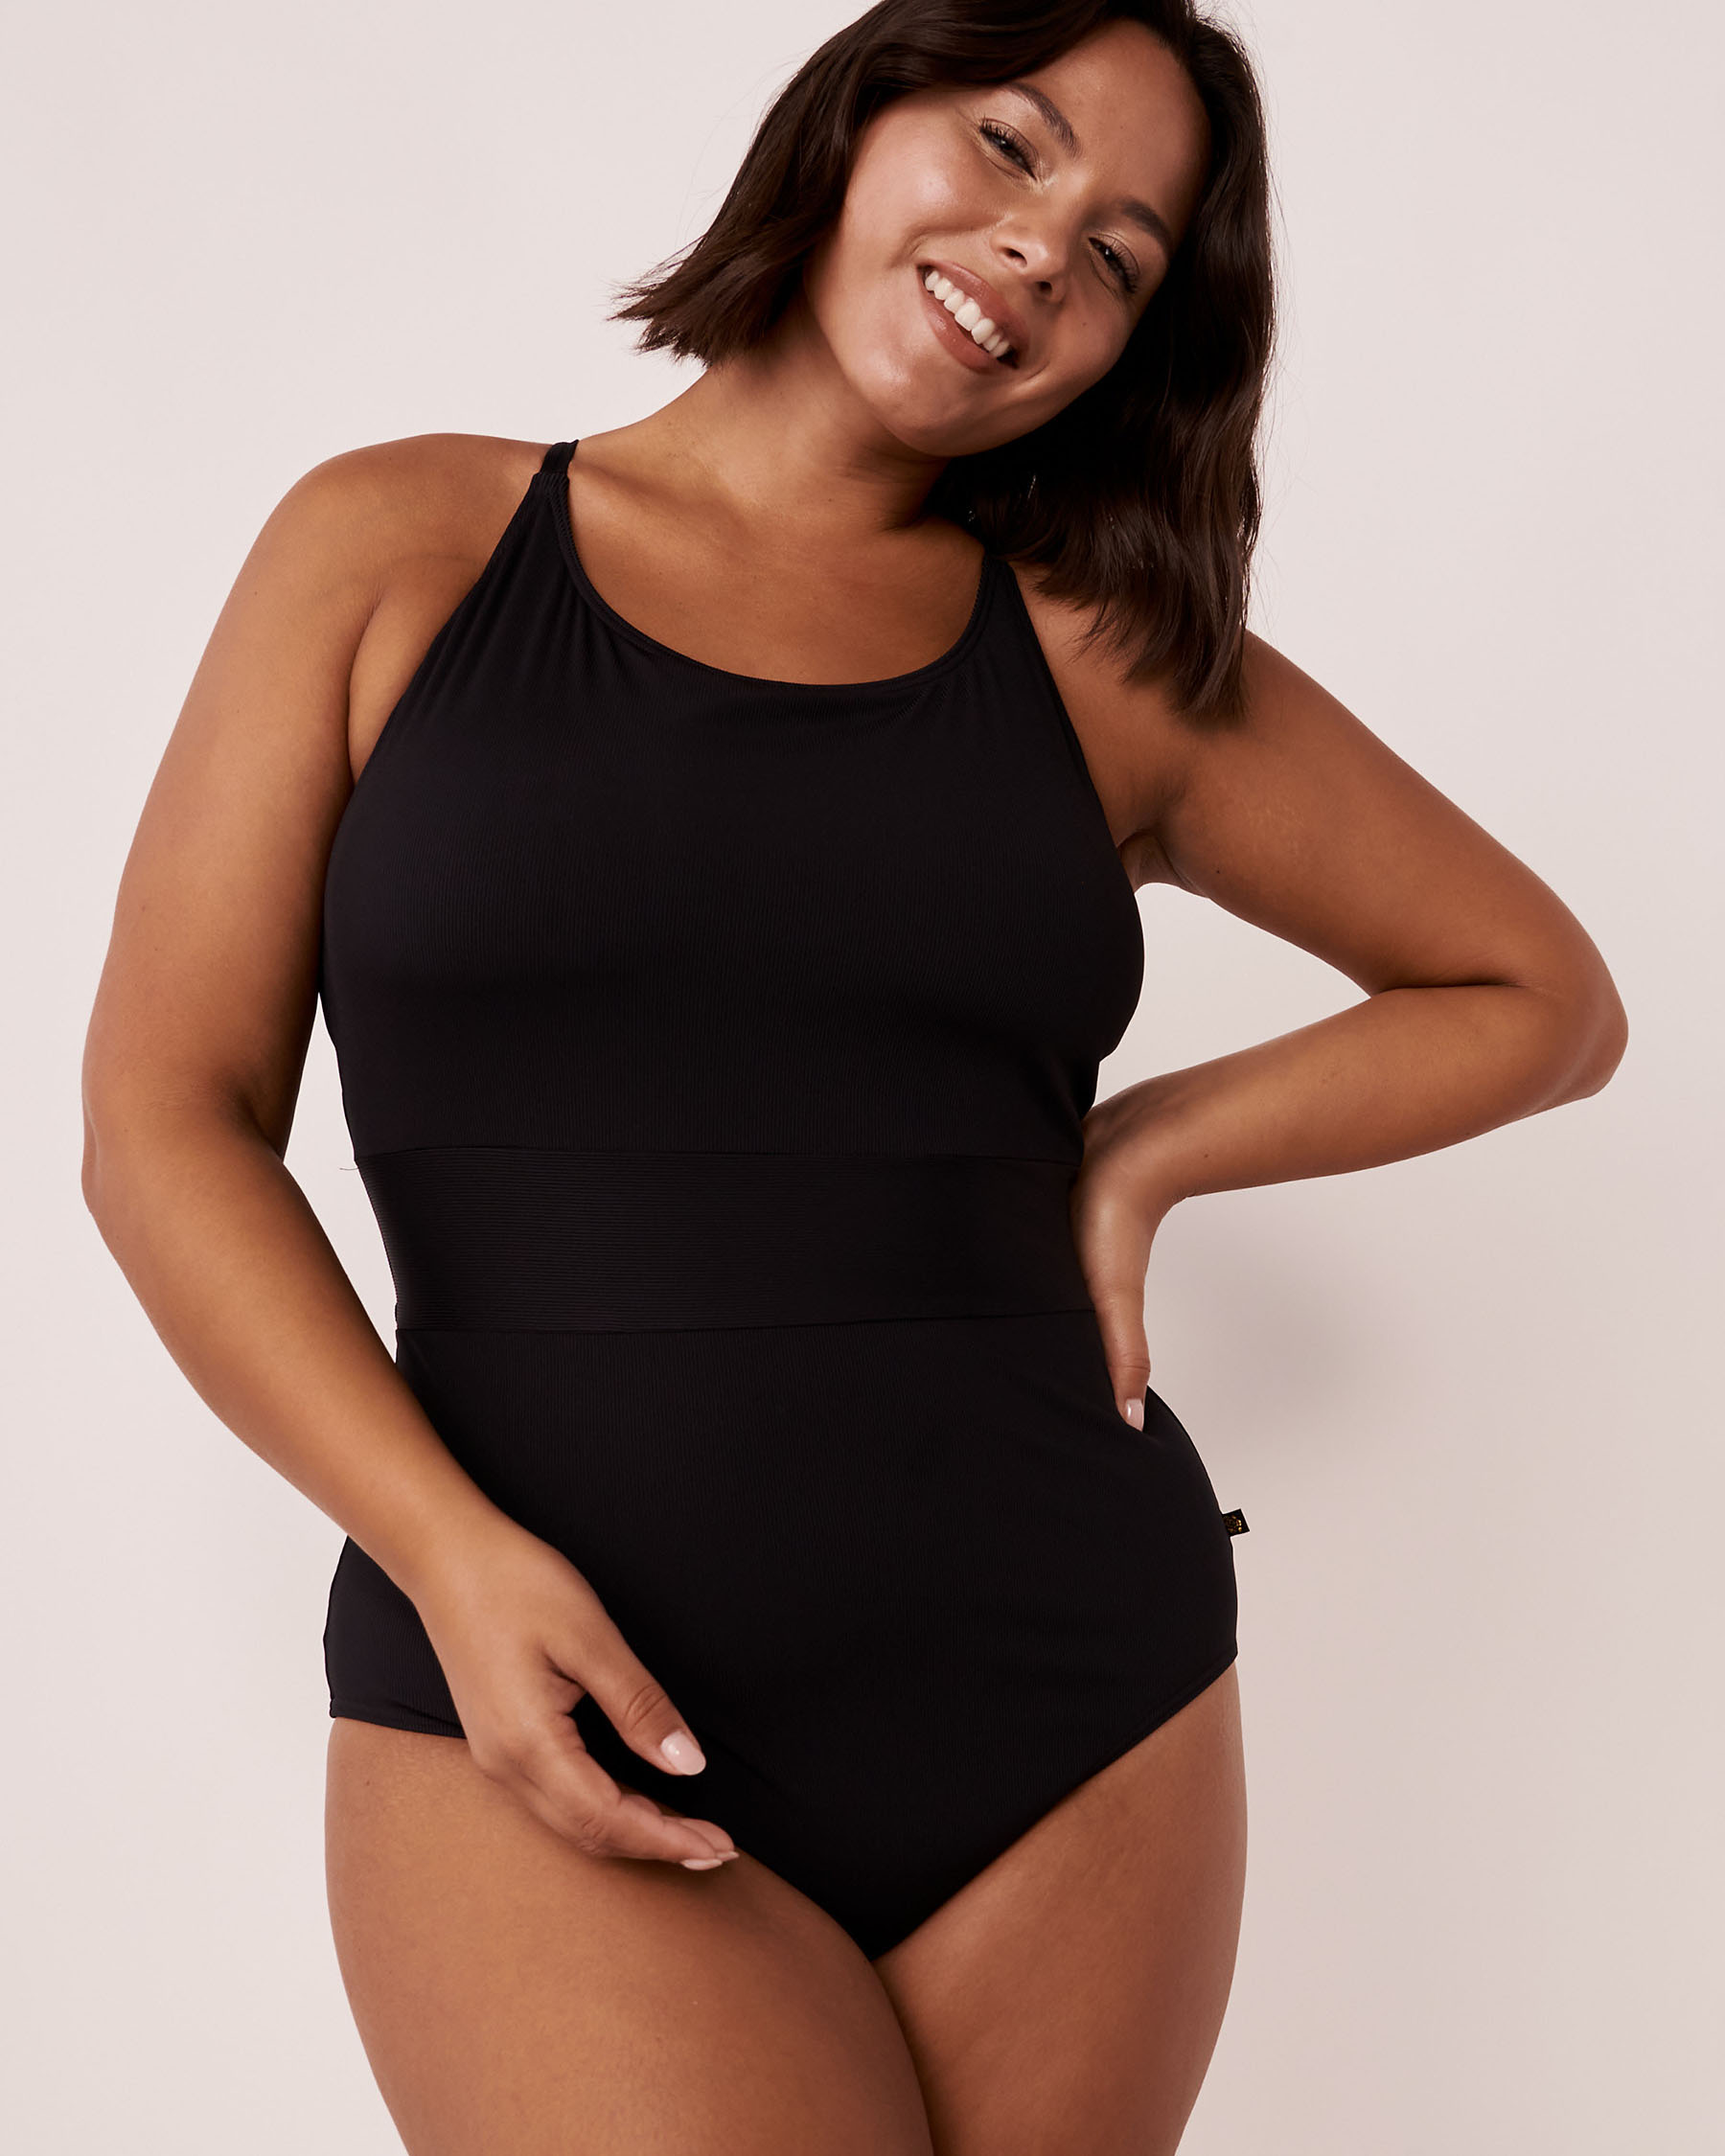 AQUAROSE SOLID Cross Back One-piece Swimsuit Black 70400052 - View1